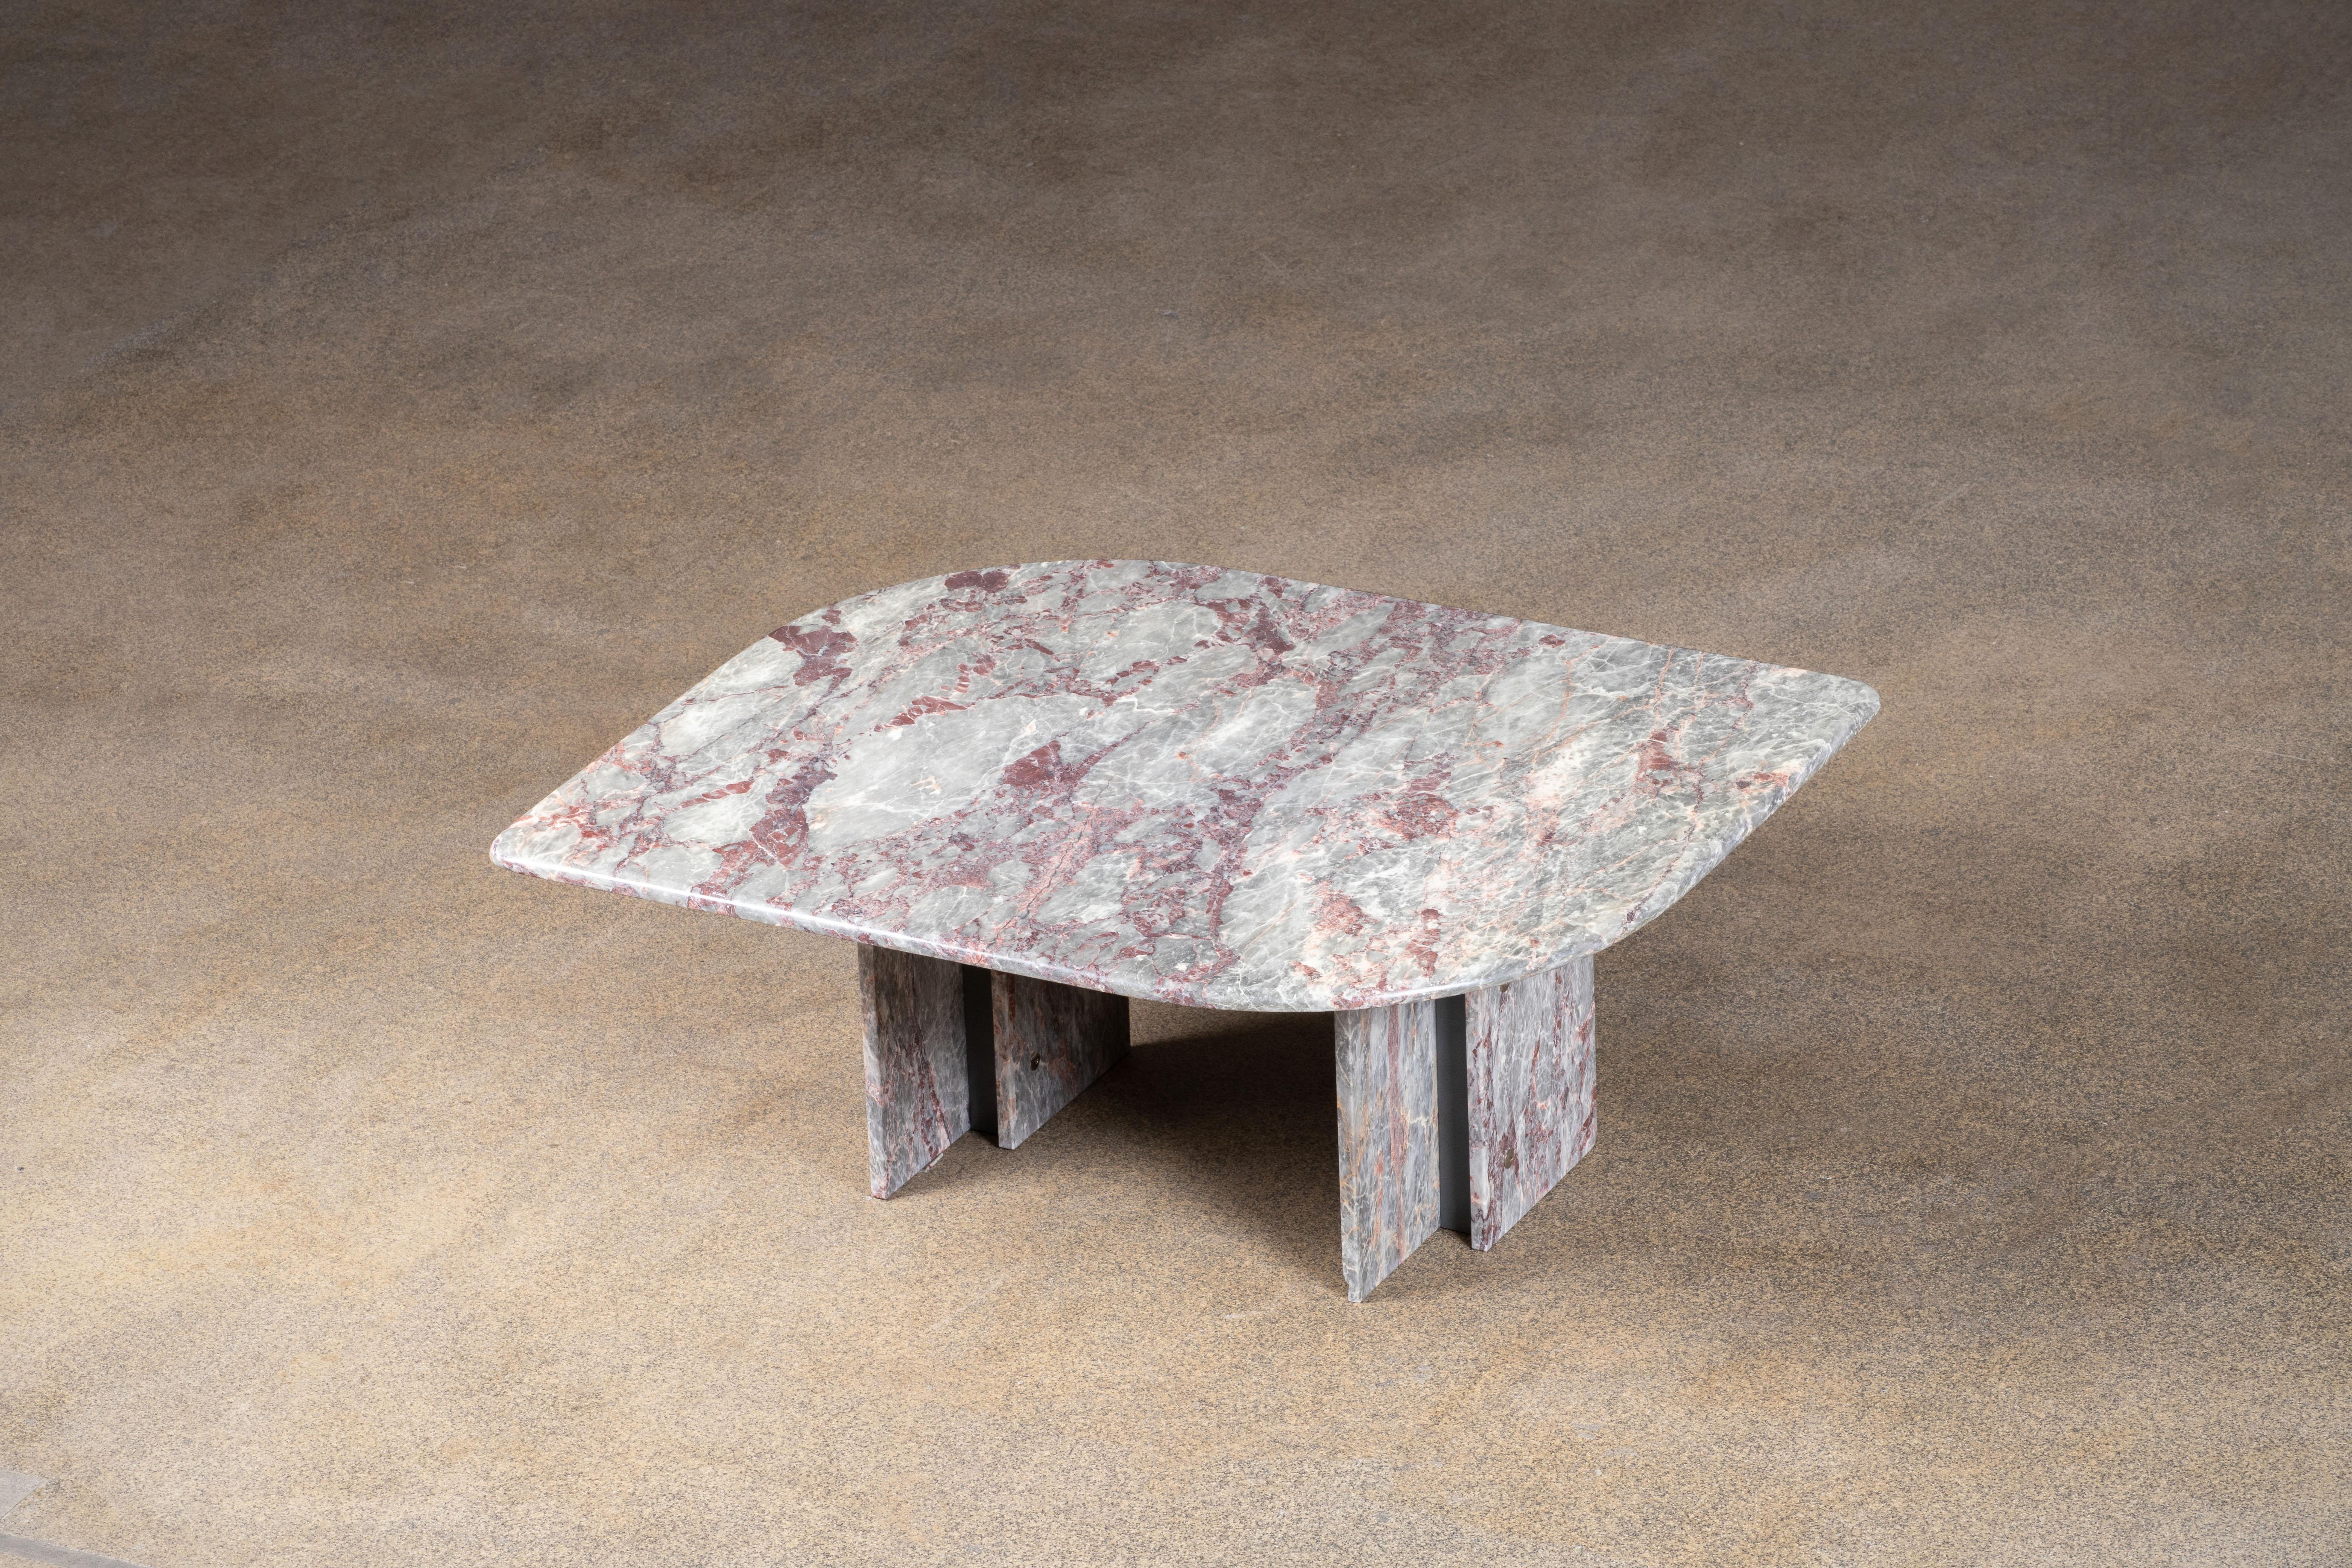 Beautiful grey, white and pink marble table.

The heavy eye-shaped top rests on two marble blocks with a metal structure between.

This table is really standing-out.

